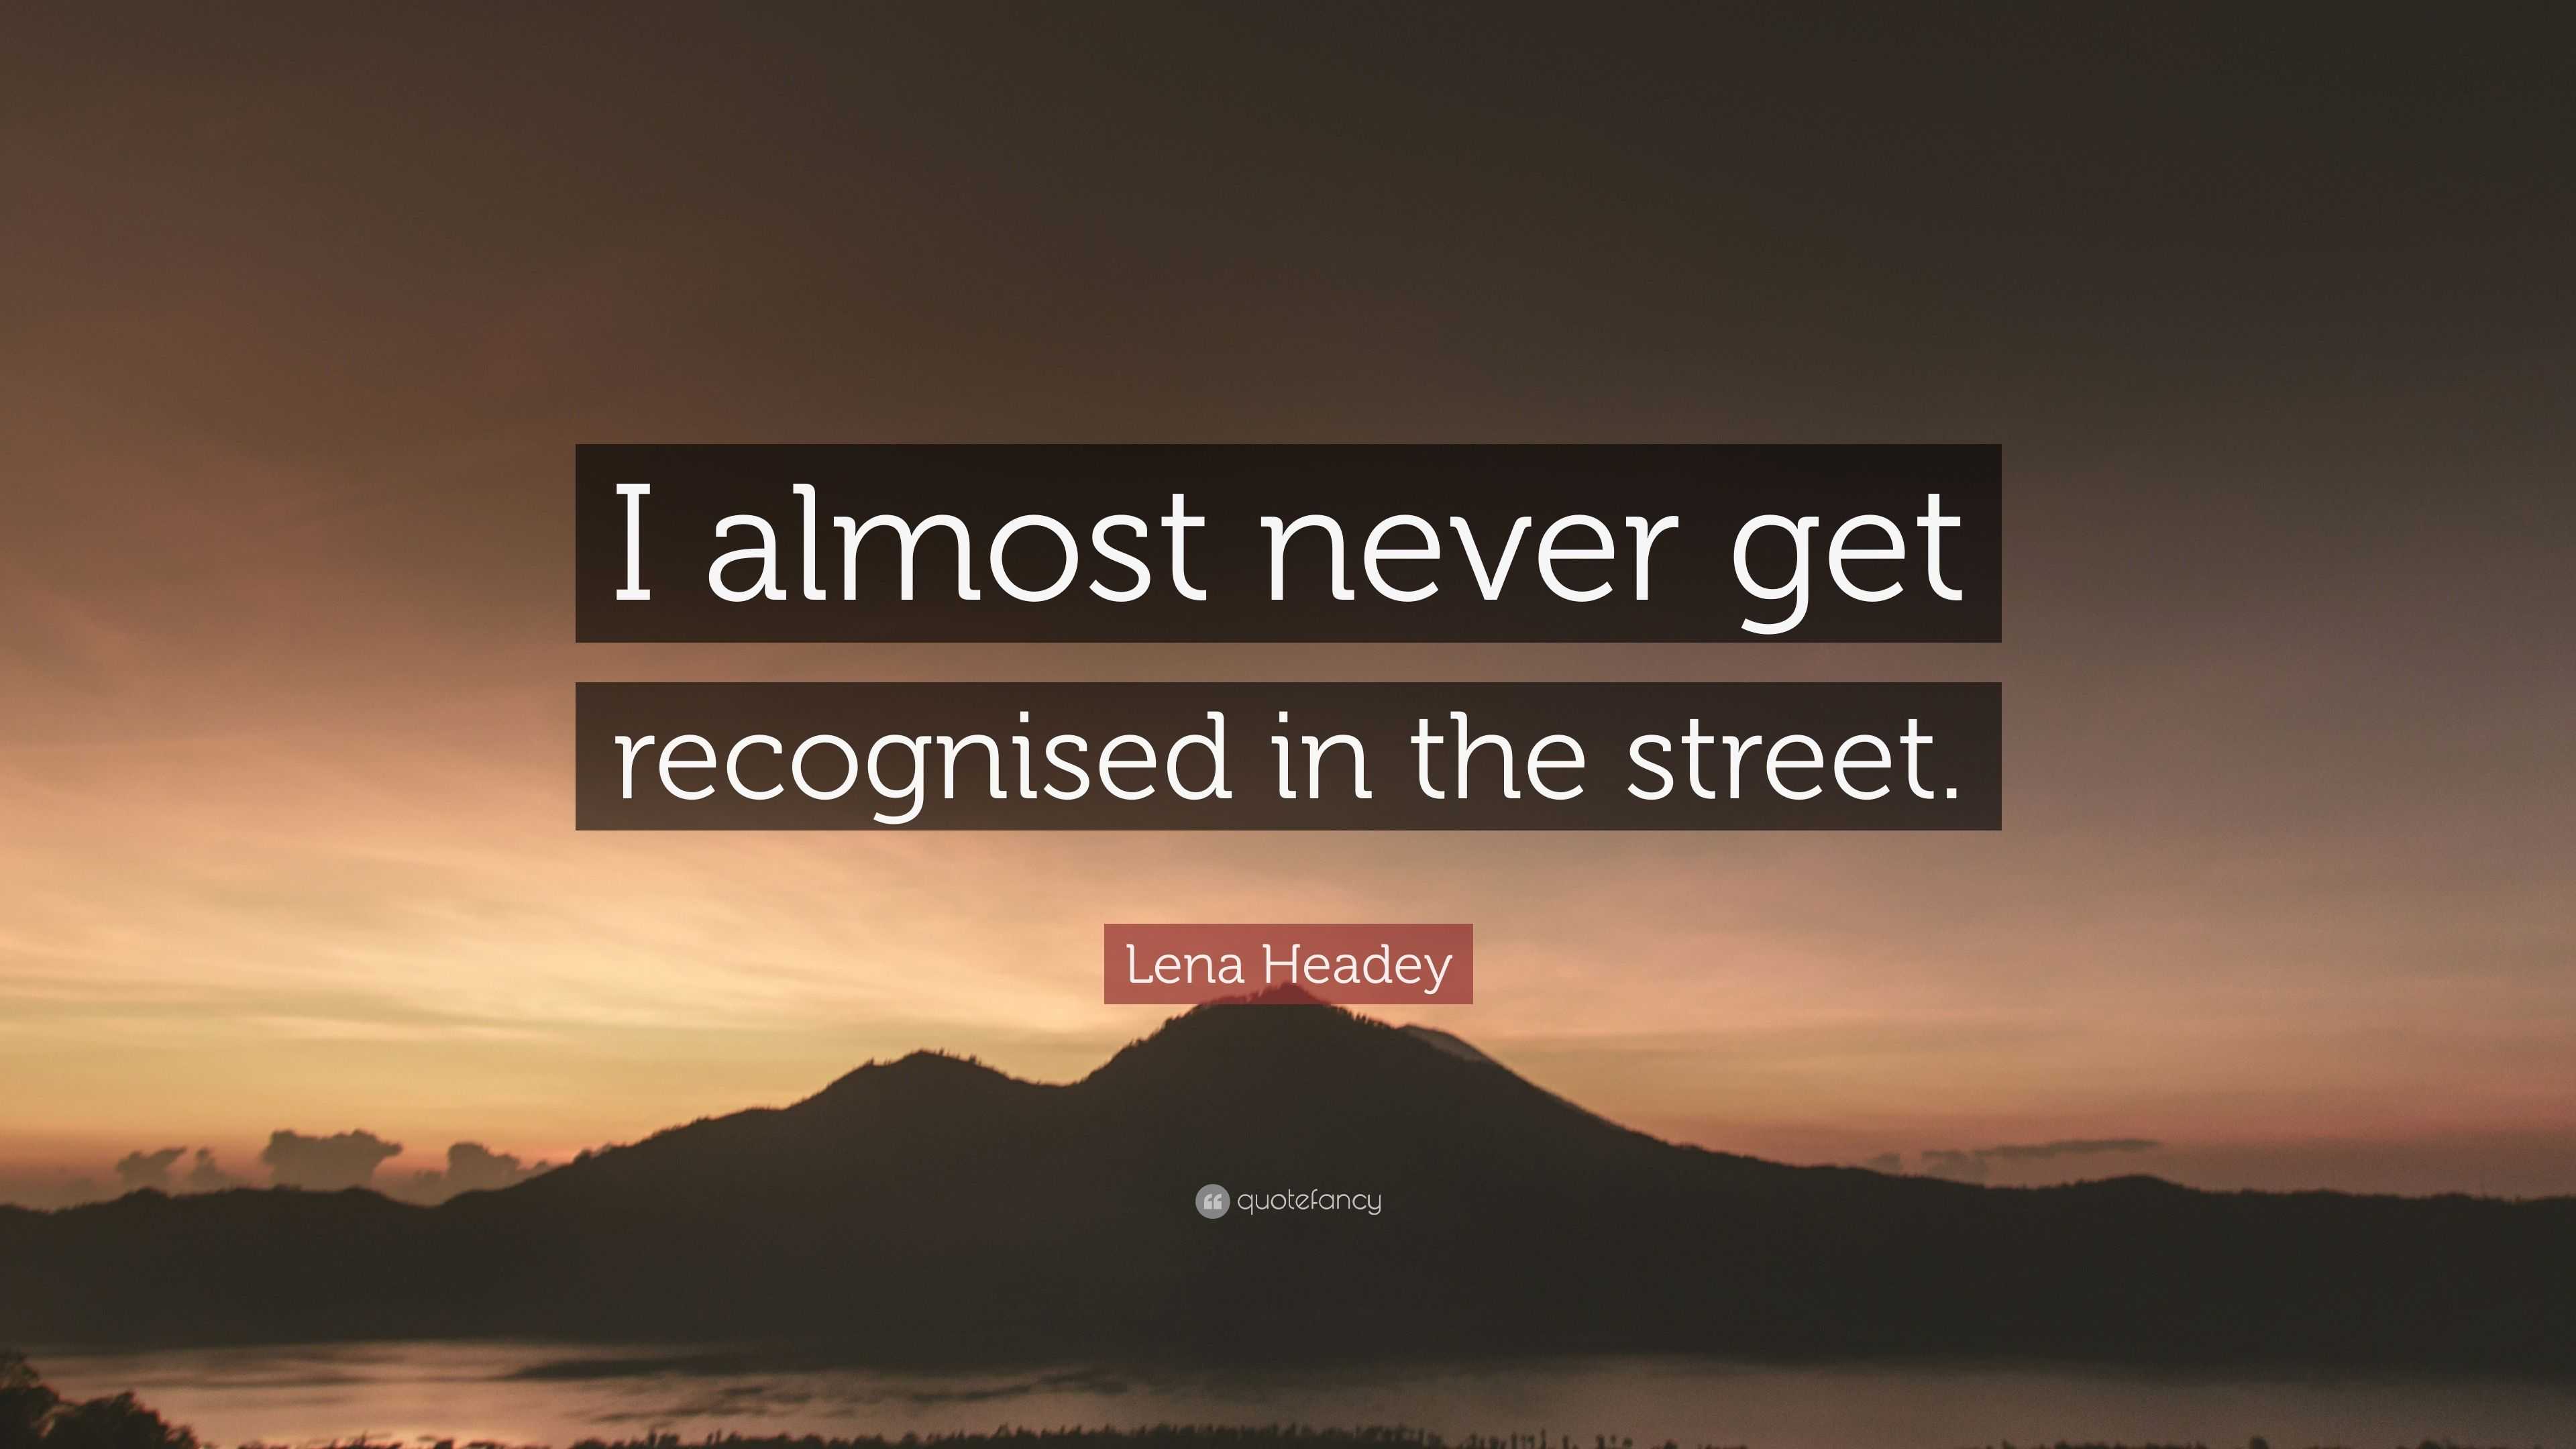 Lena Headey Quote I Almost Never Get Recognised In The Street Images, Photos, Reviews